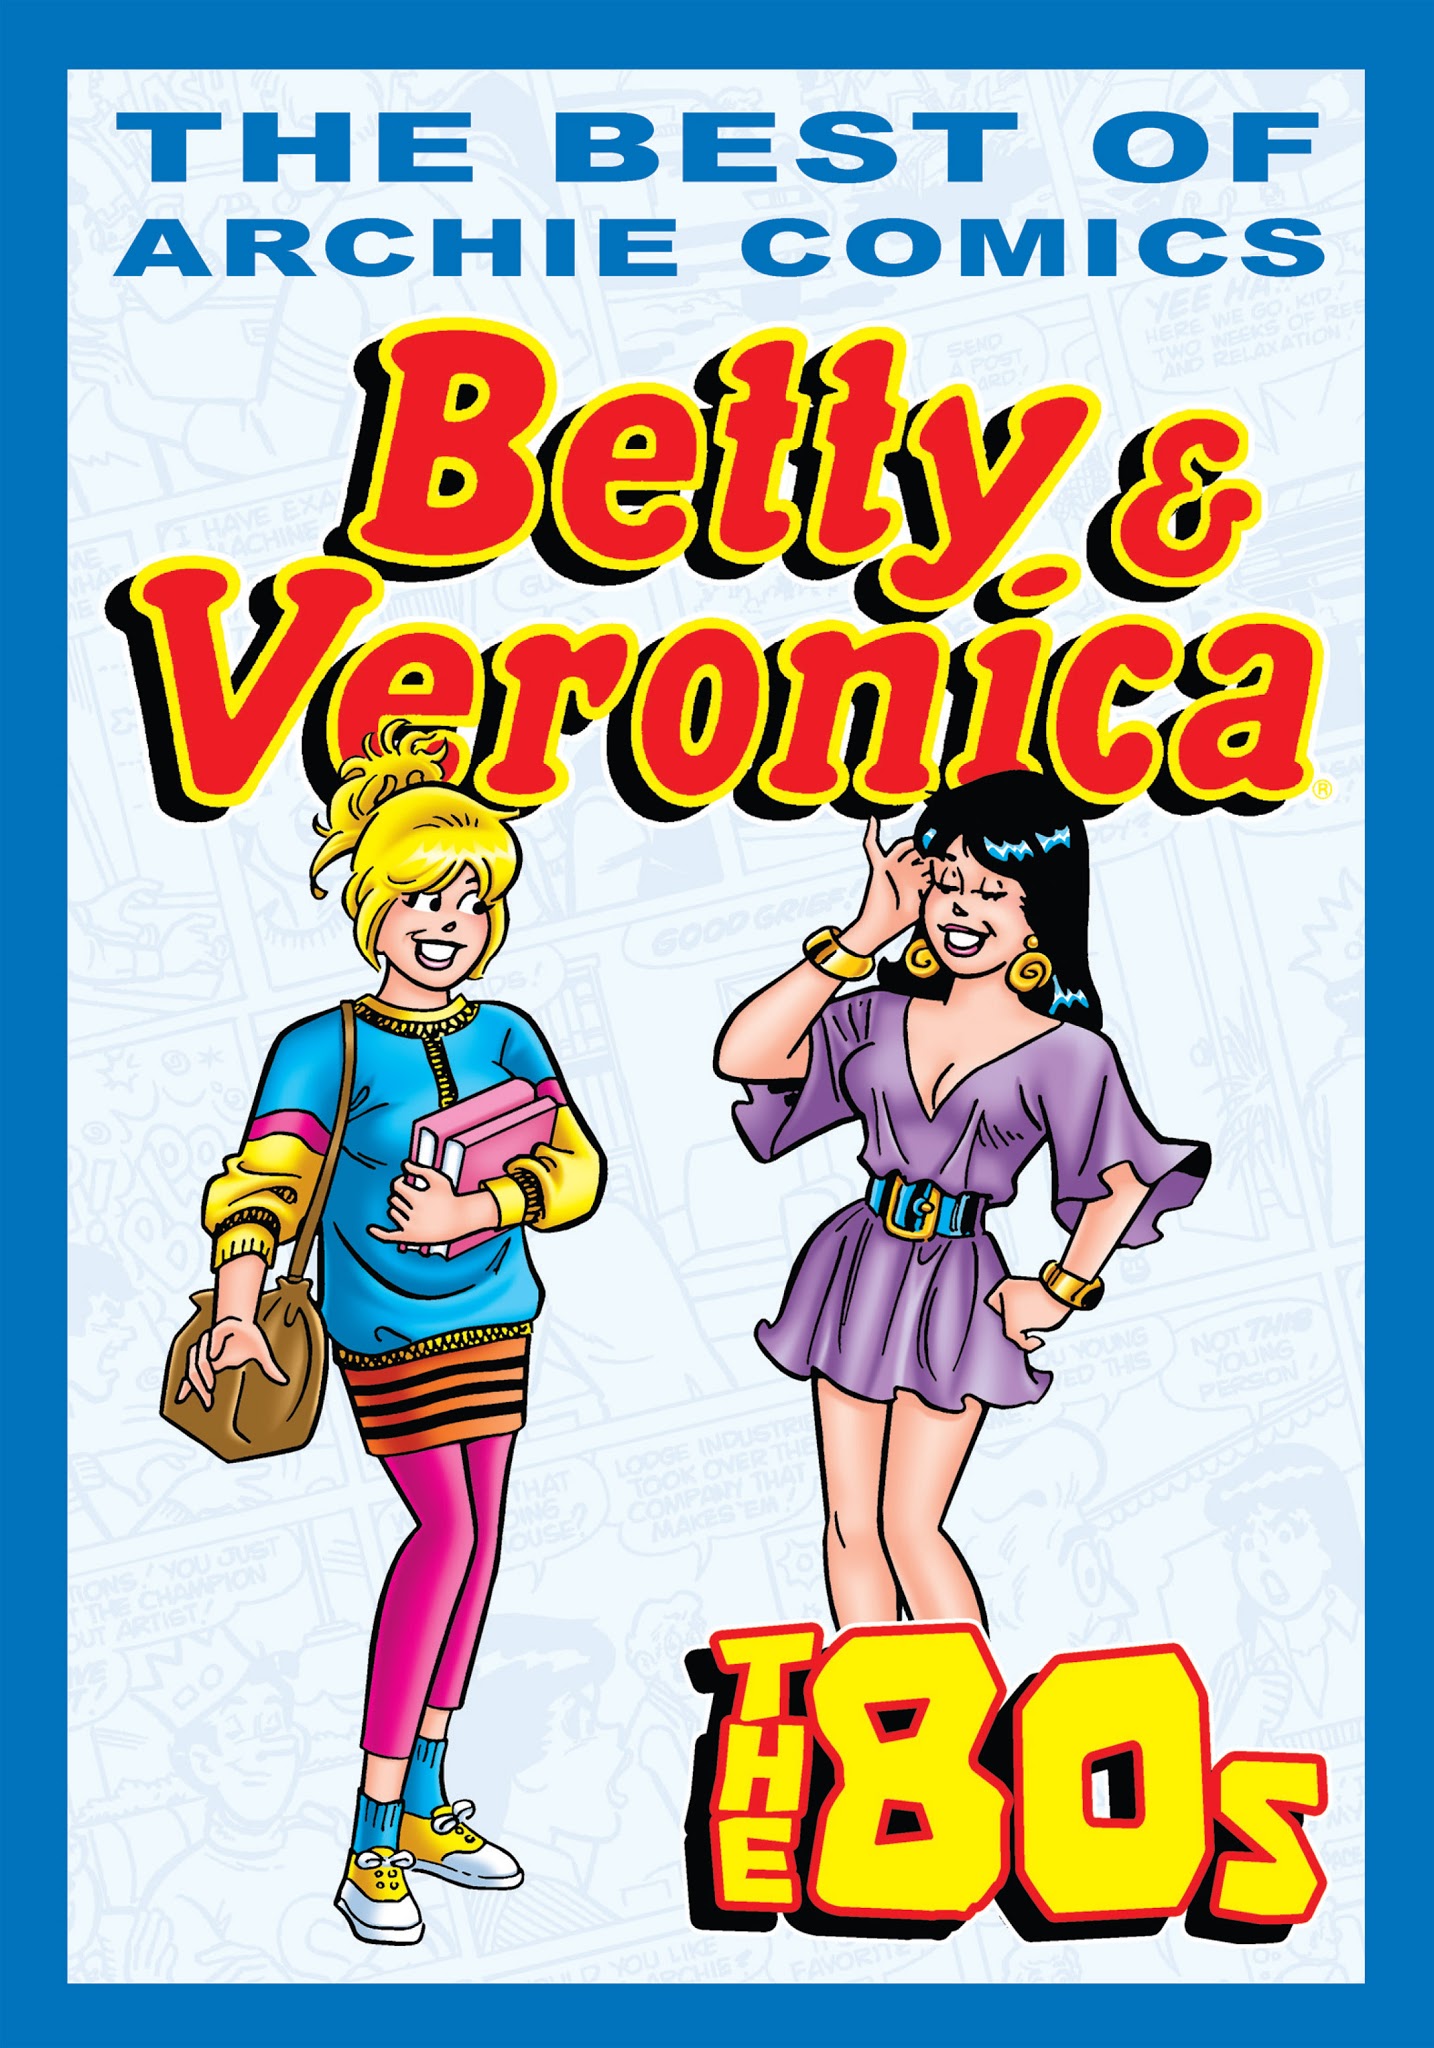 Read online The Best of Archie Comics: Betty & Veronica comic -  Issue # TPB - 206